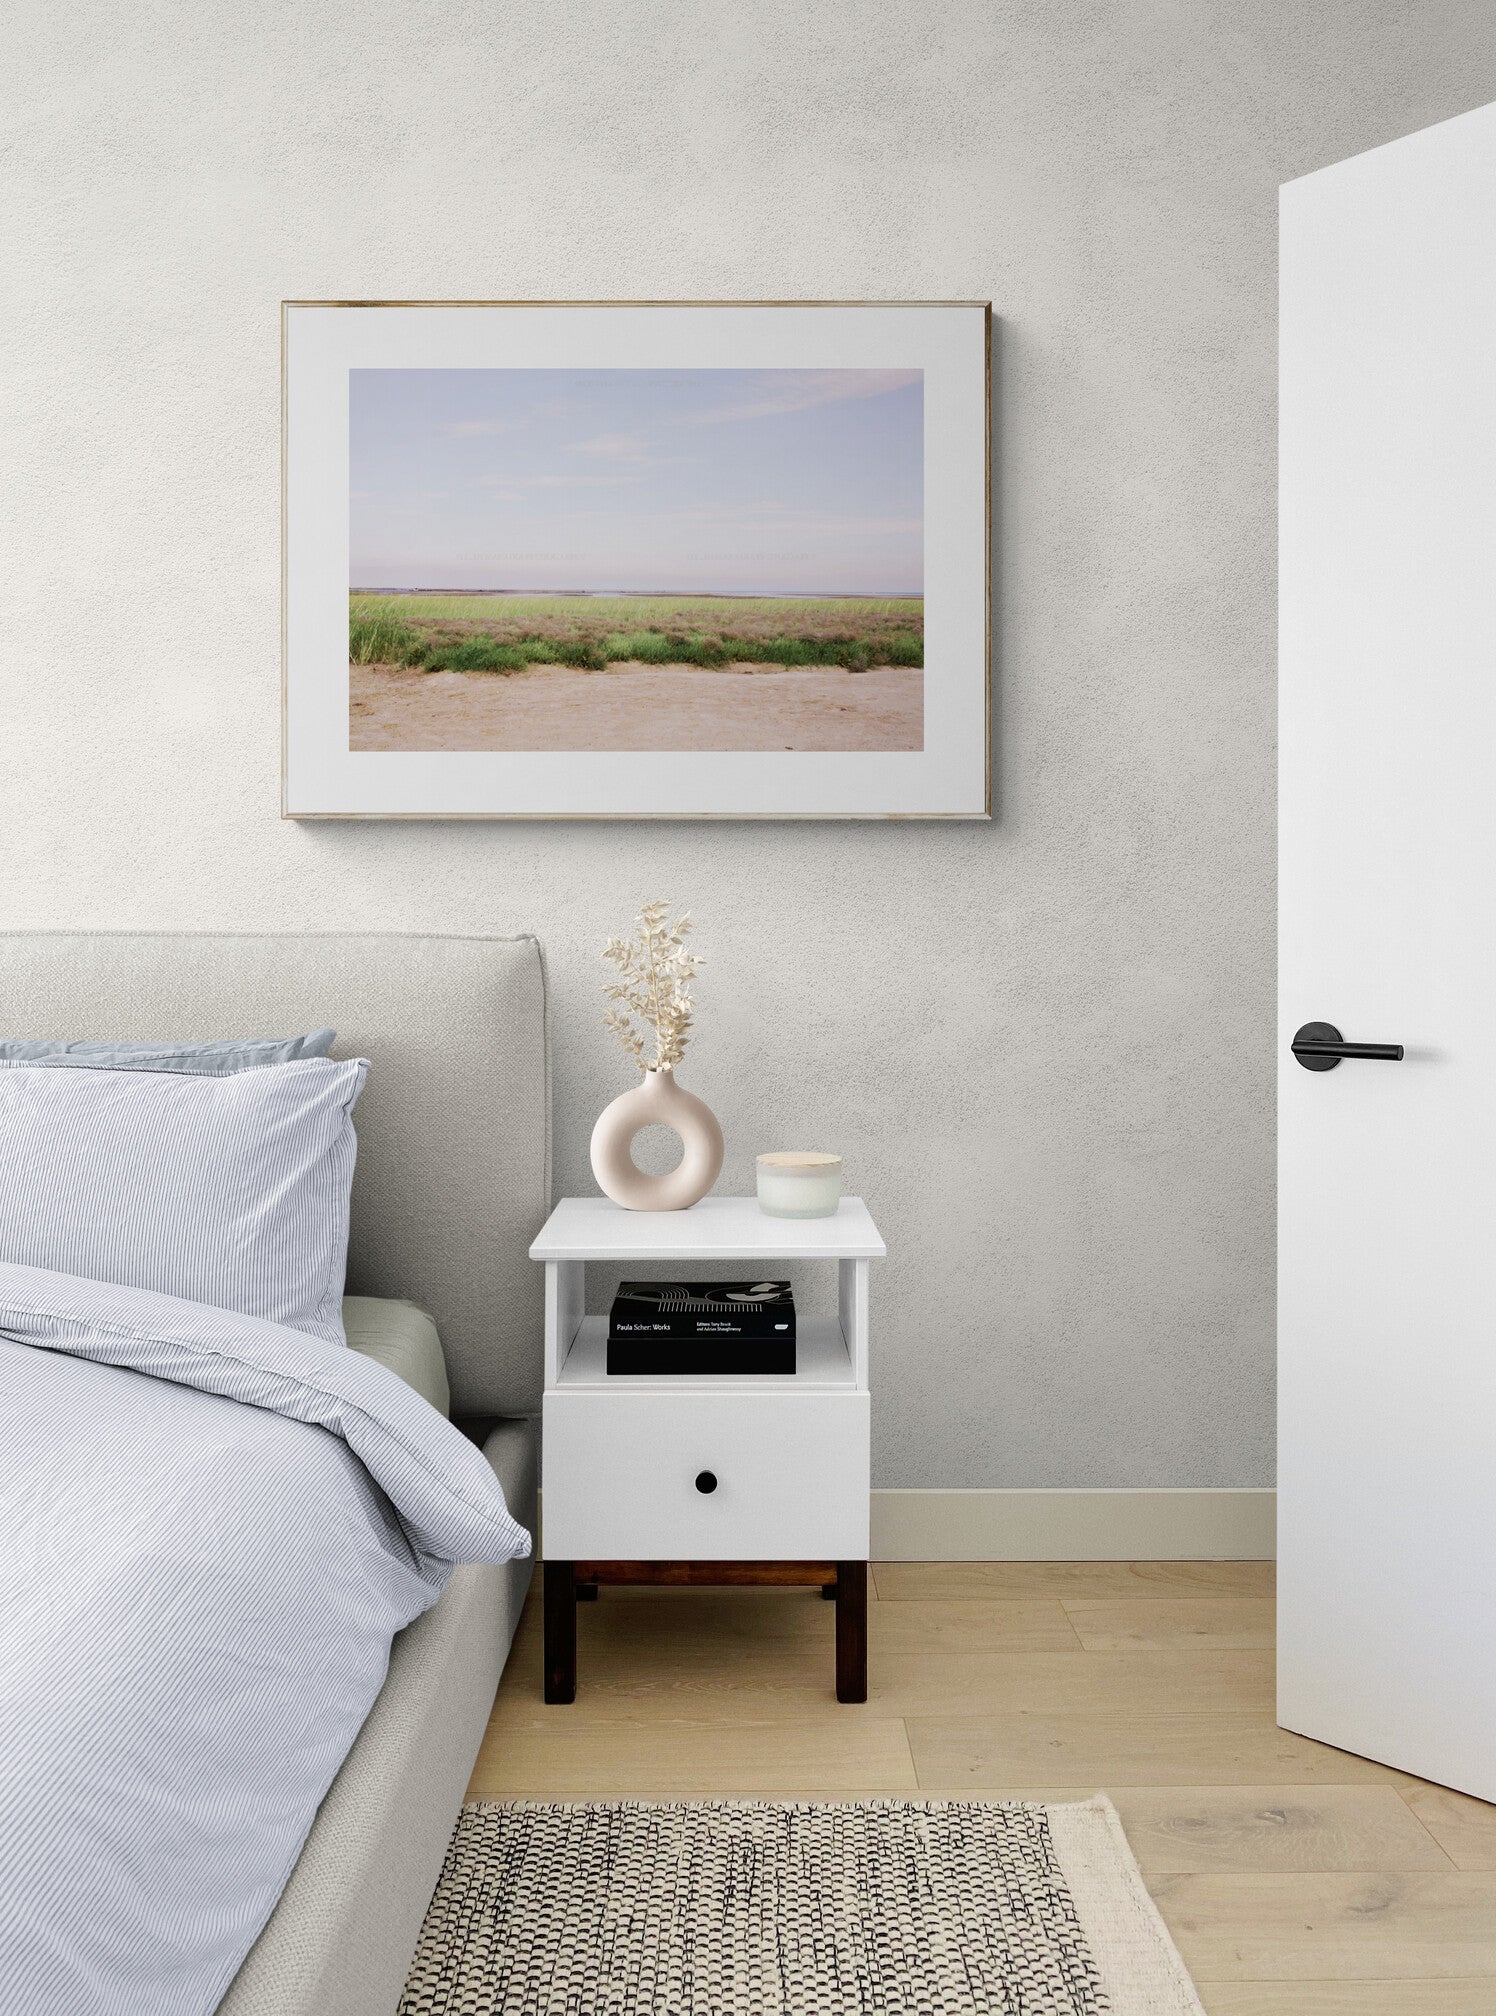 Sea Lavender Cape Cod Photograph Print as Wall Art in a Bedroom